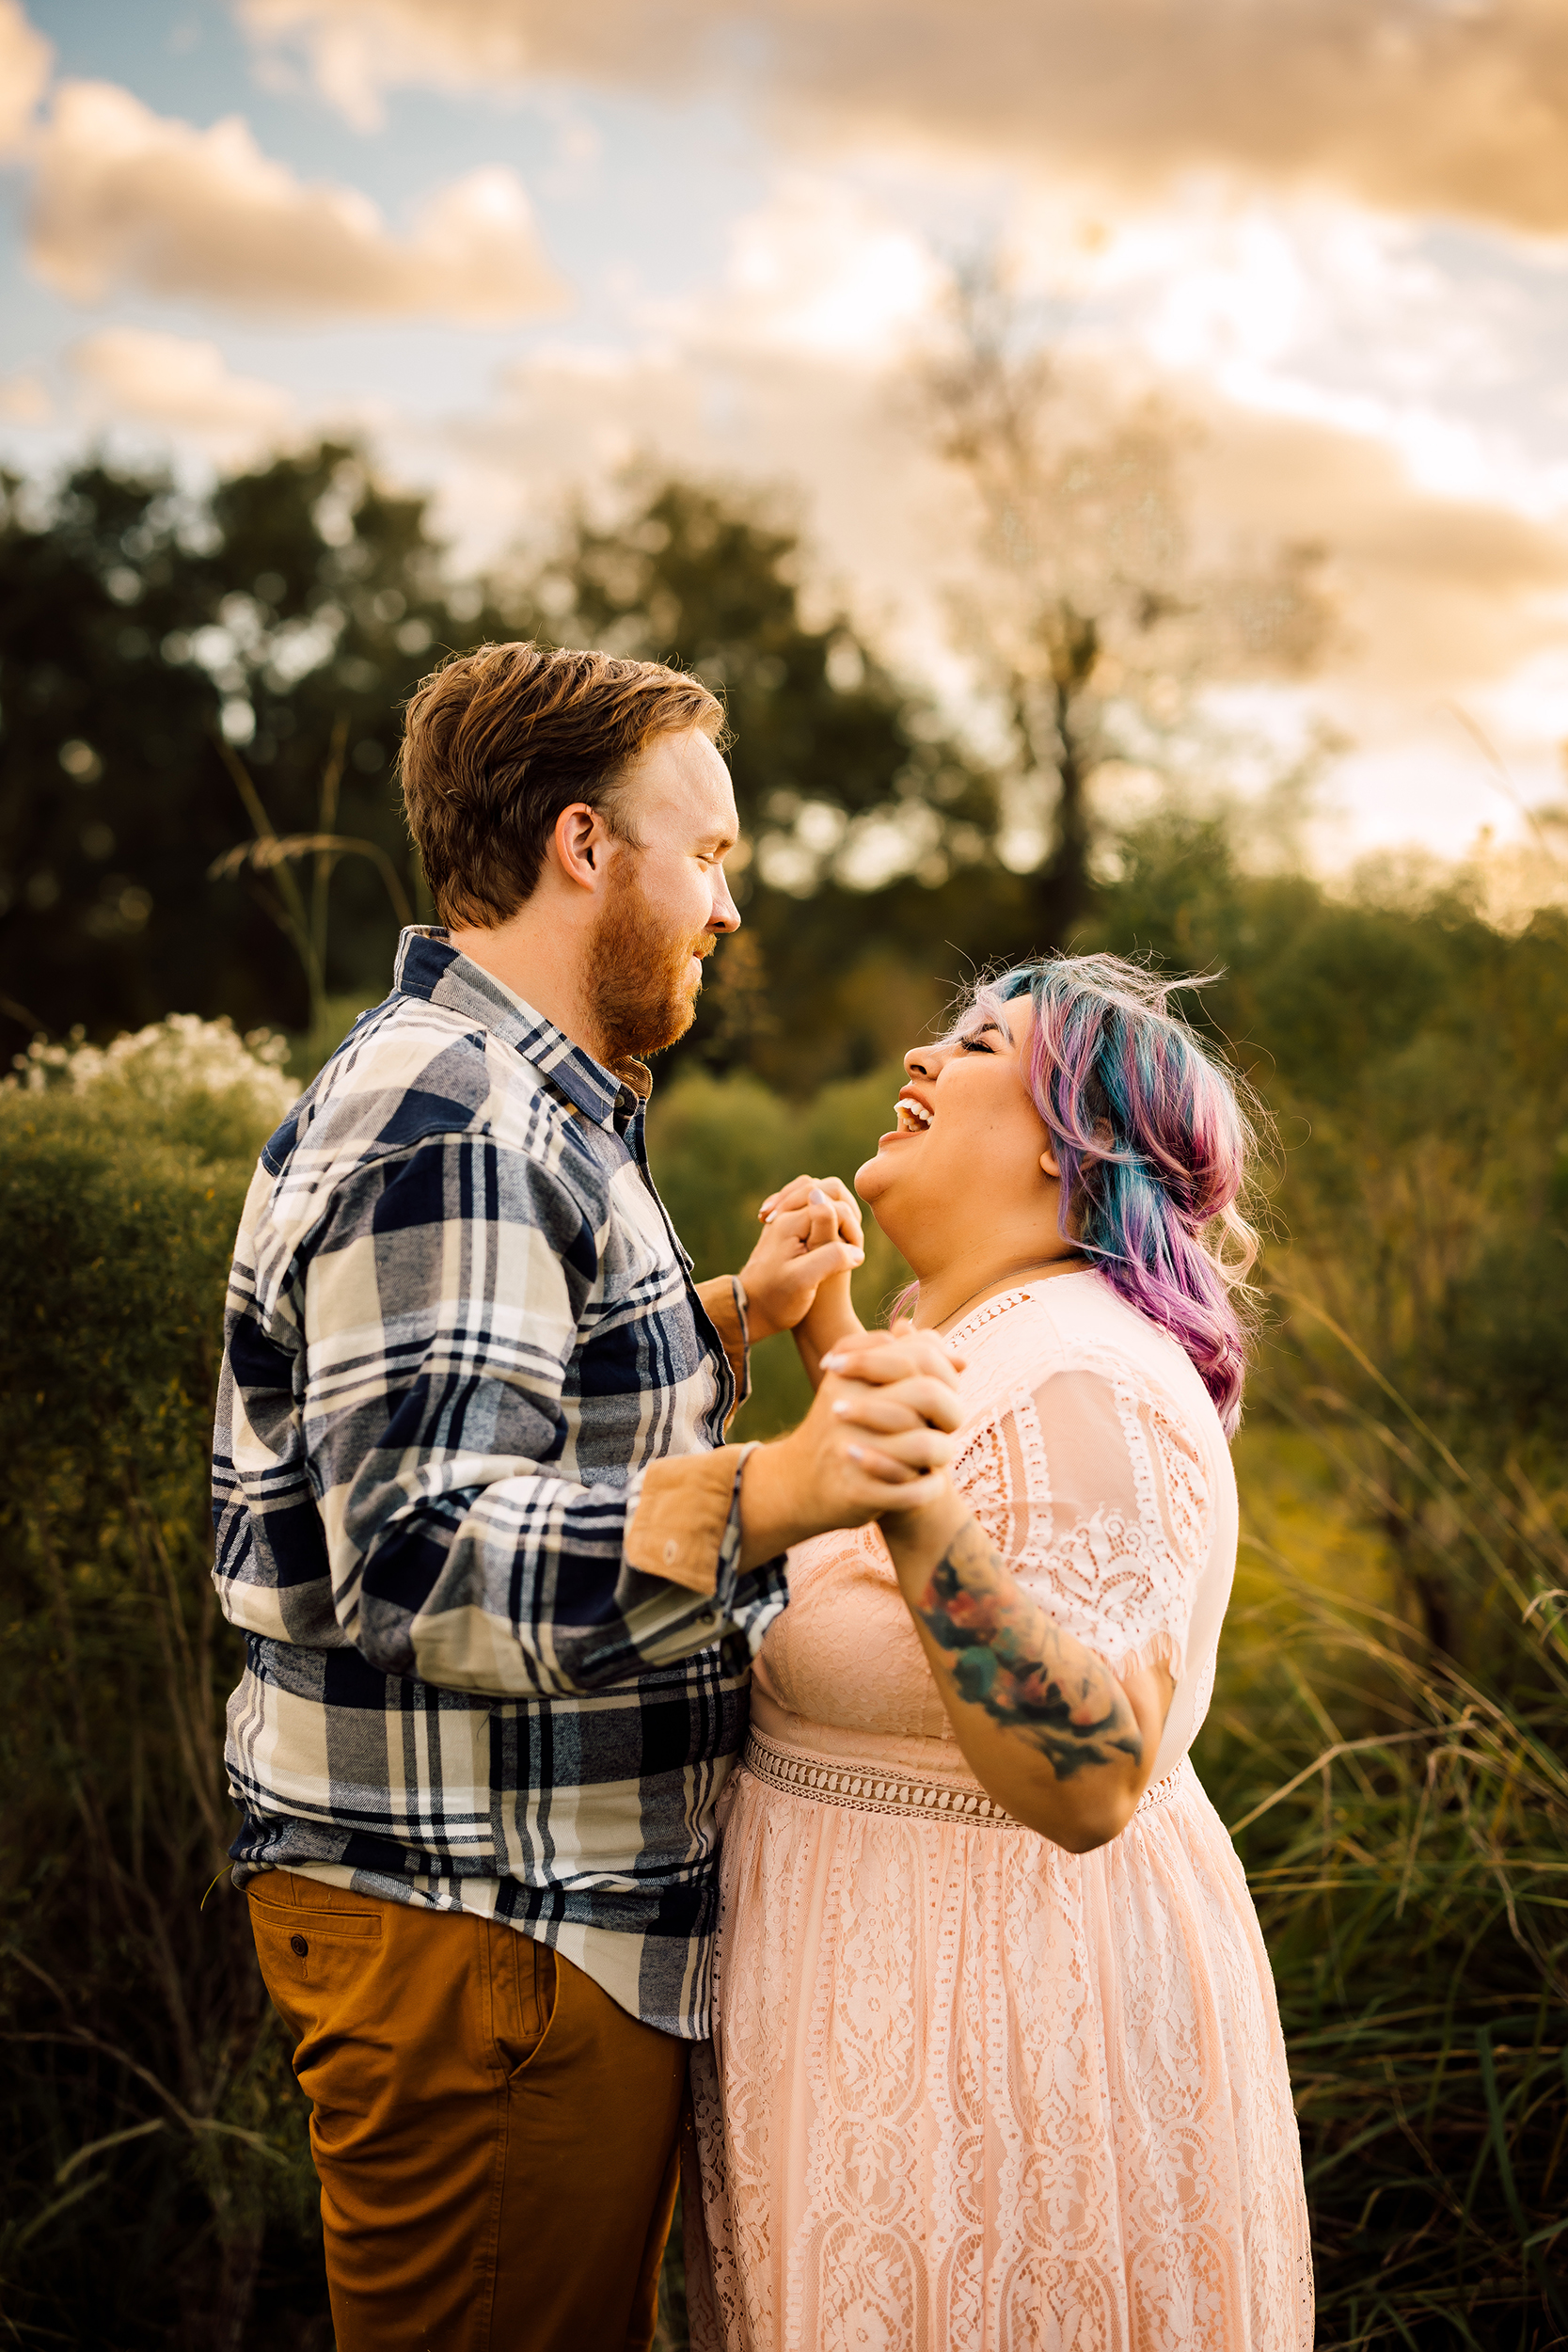 Best Natural Engagement Photo Poses & Ideas - Keri Calabrese Photography